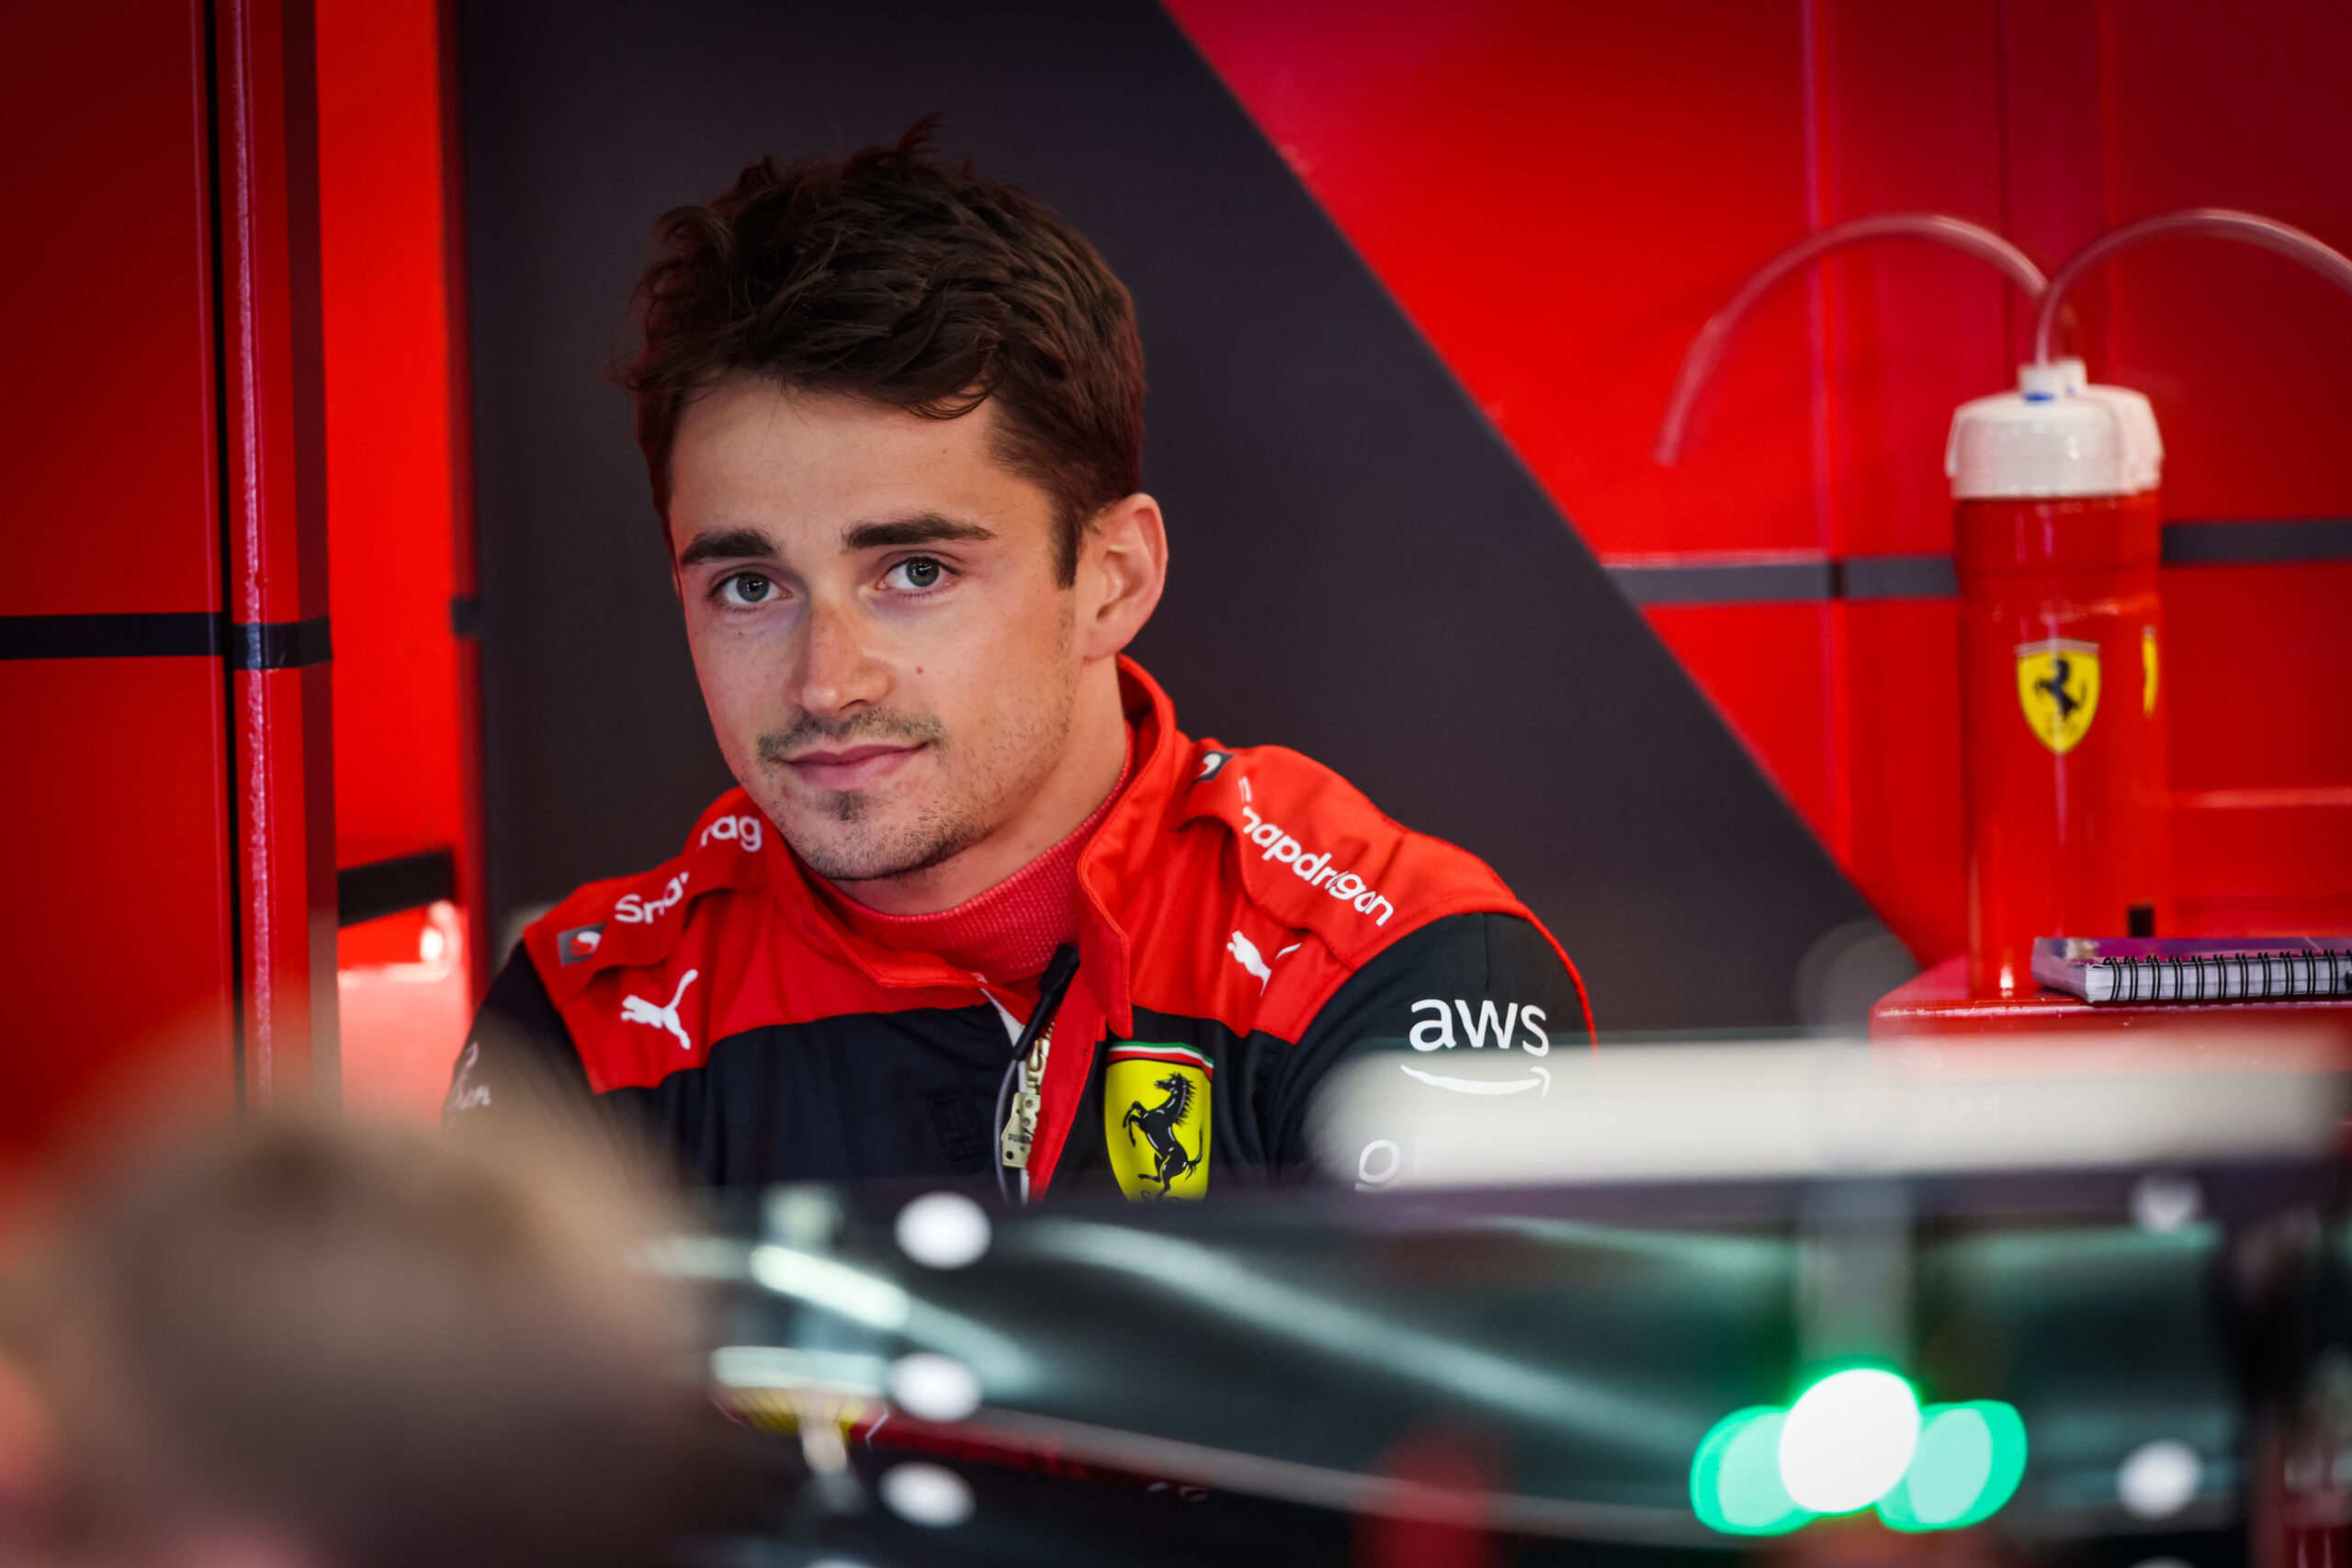 Charles Leclerc on the cover of the ‘F1 2022’ video game